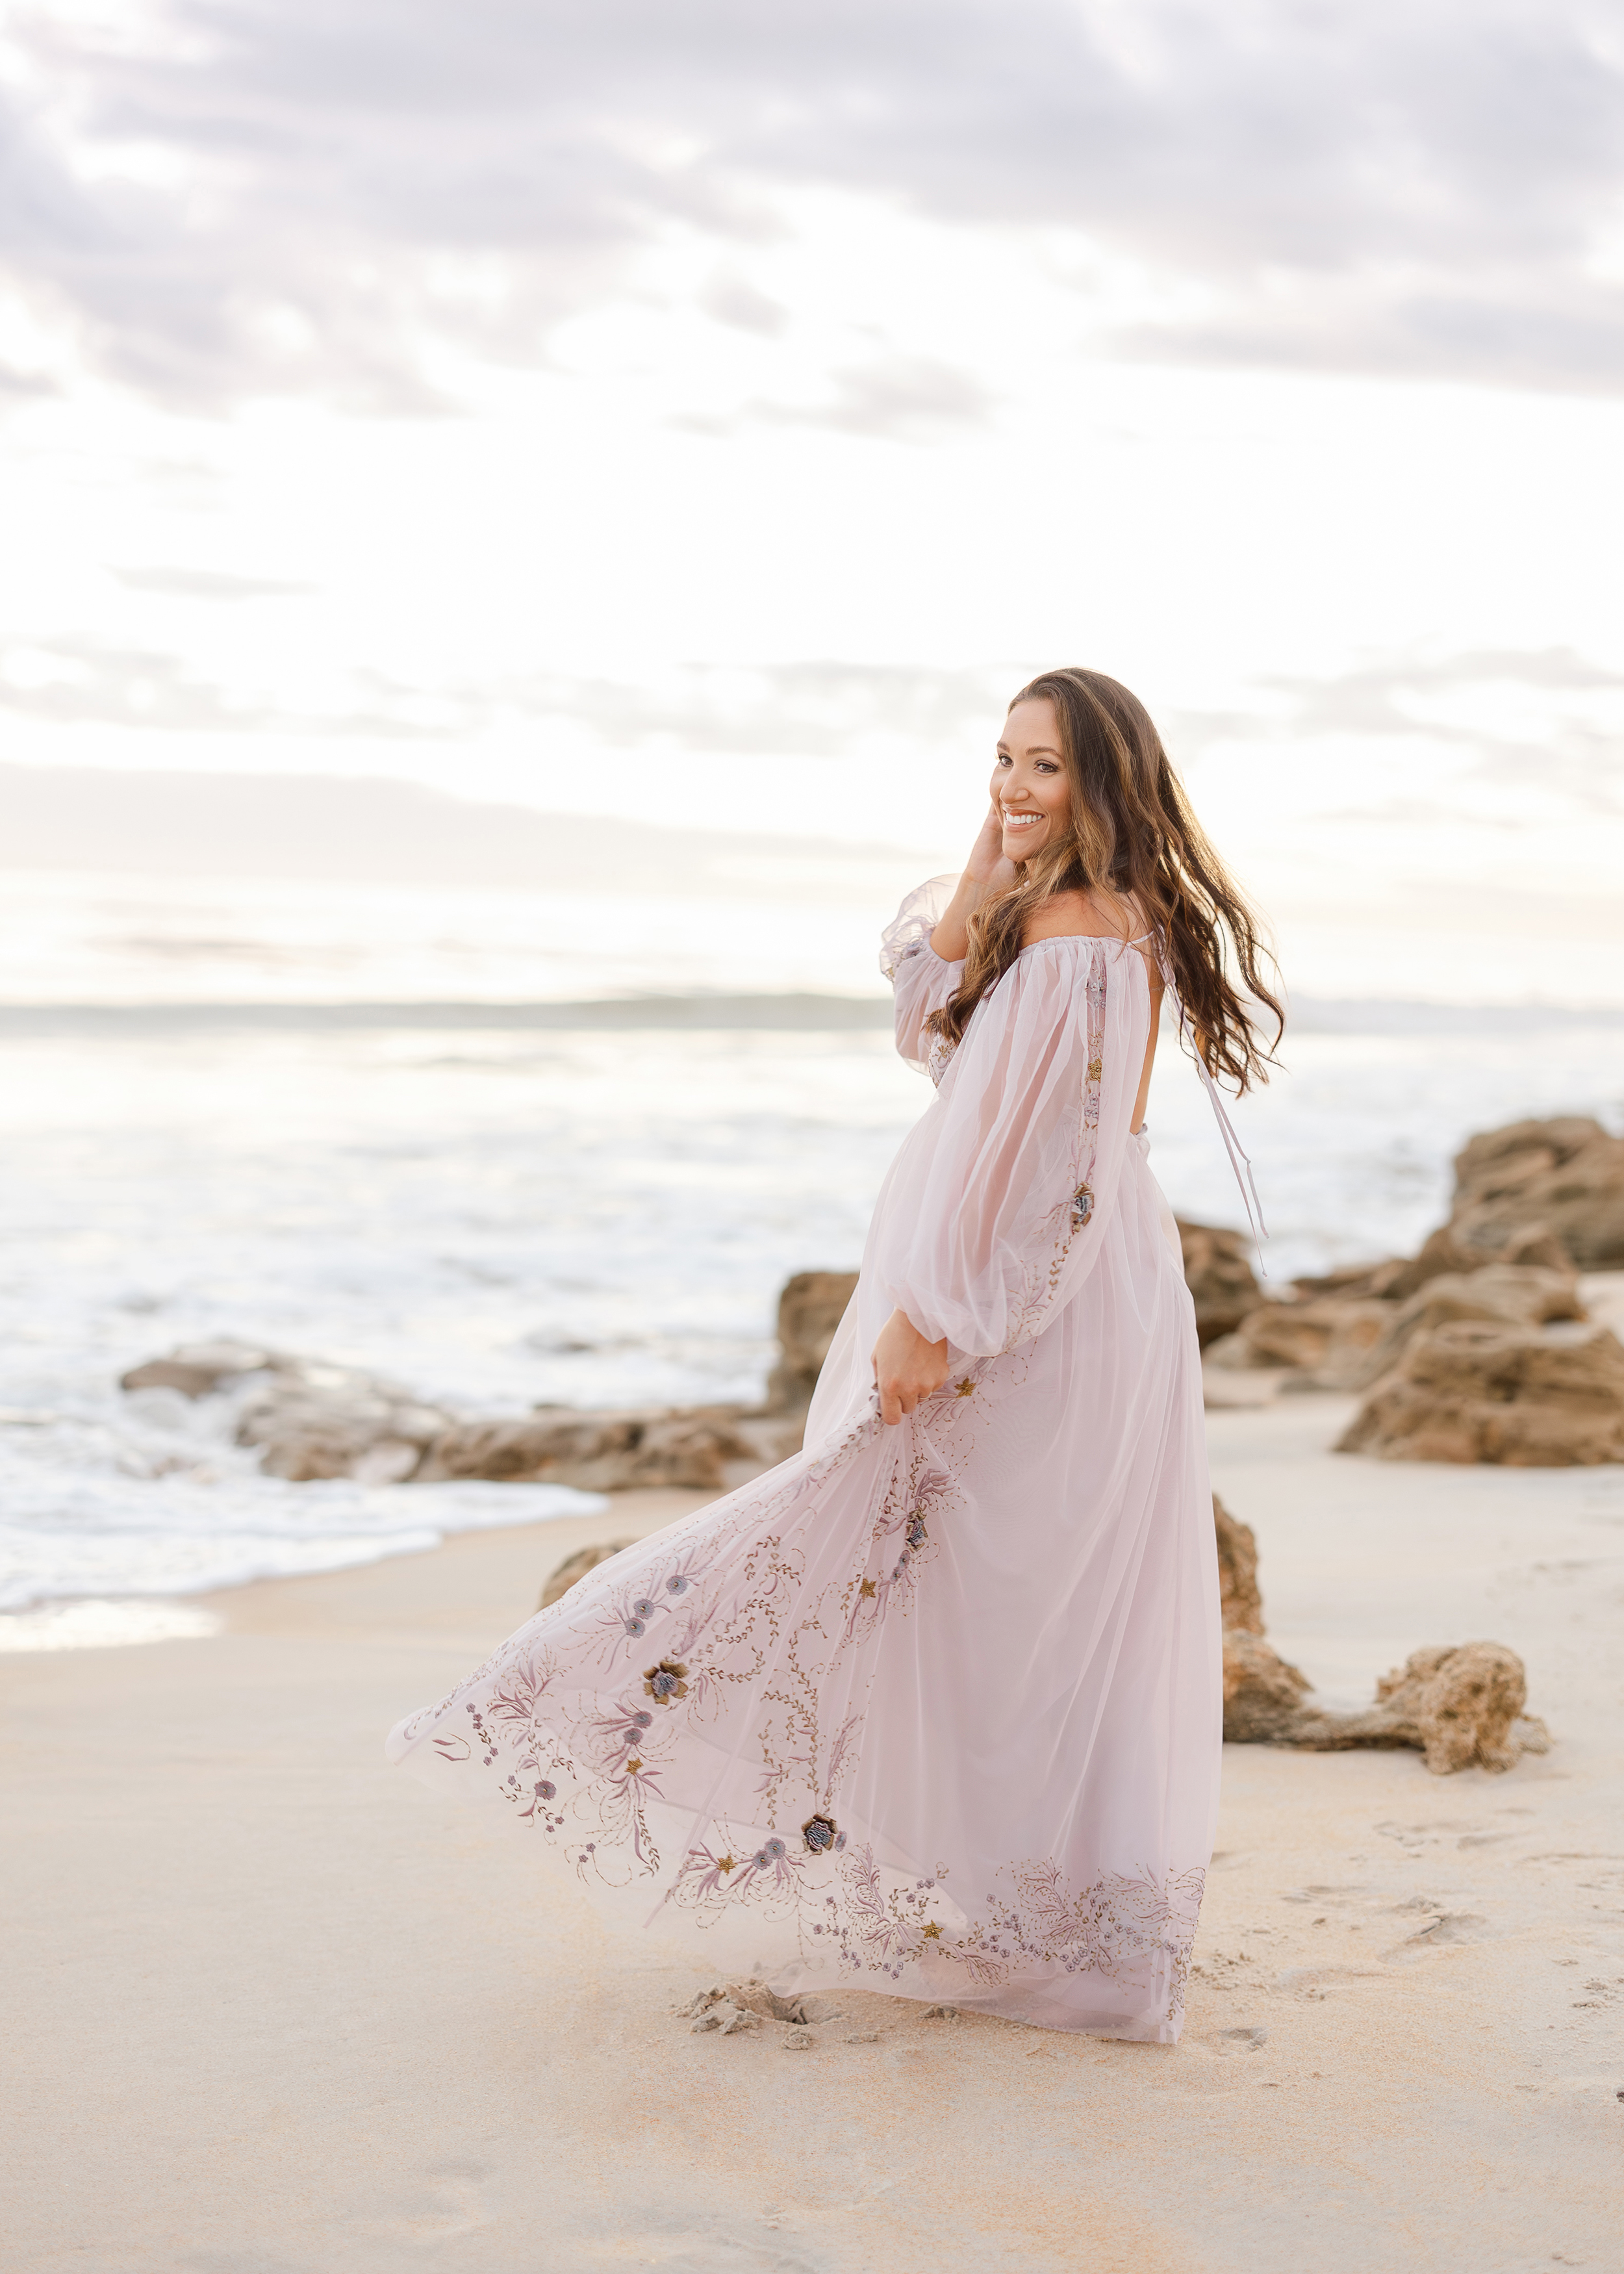 Light and airy maternity photo of a woman on the beach at sunrise.